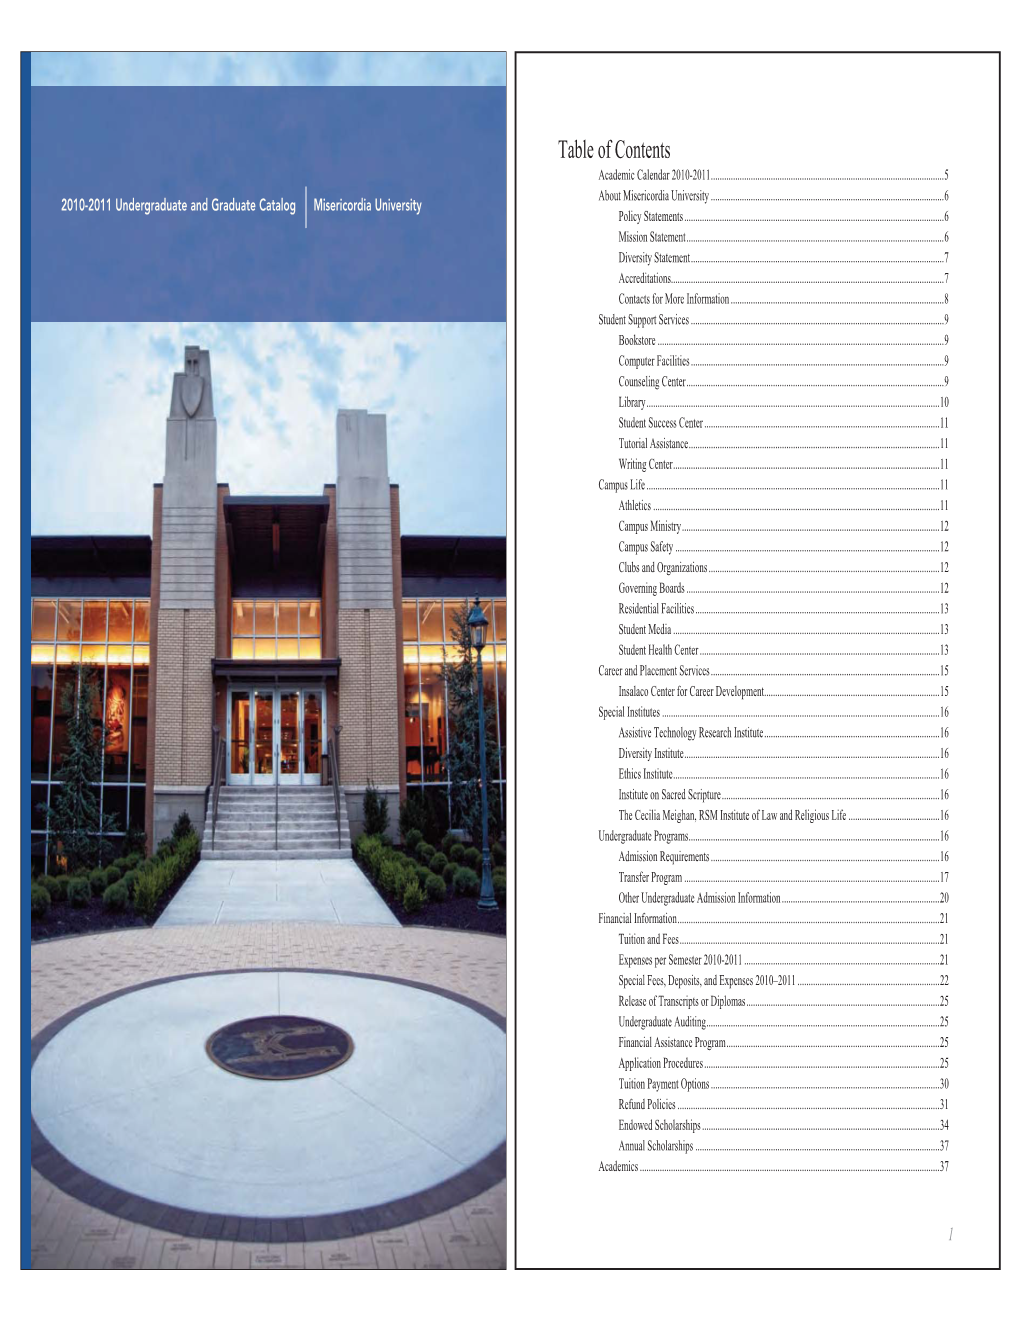 Table of Contents Academic Calendar 2010-2011